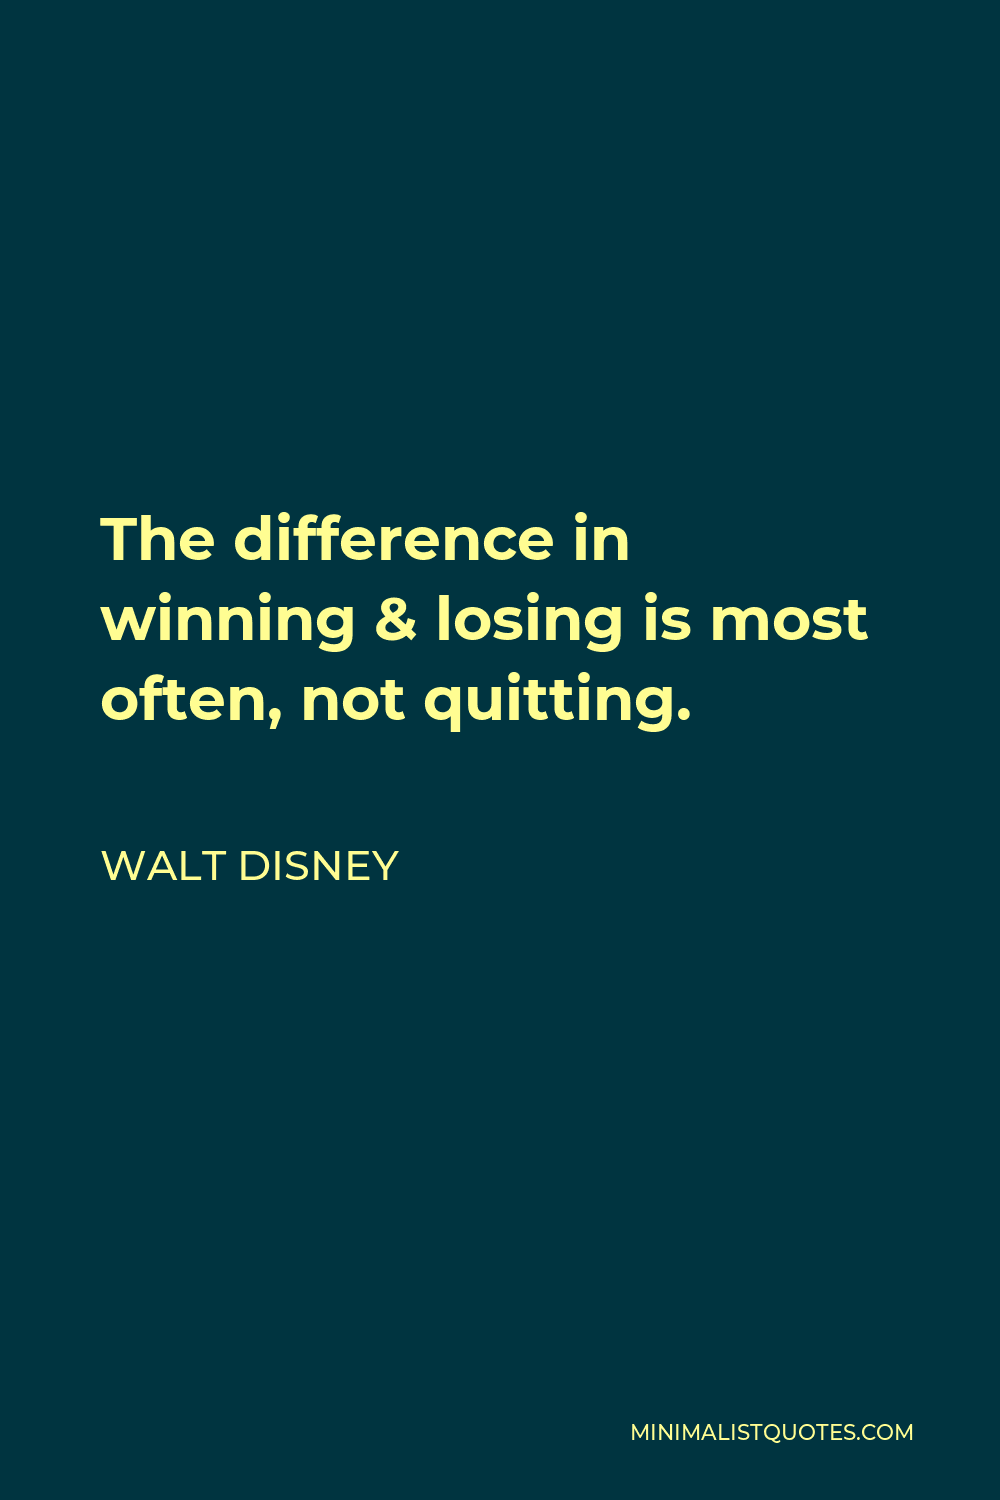 Walt Disney Quote - The difference in winning & losing is most often, not quitting.